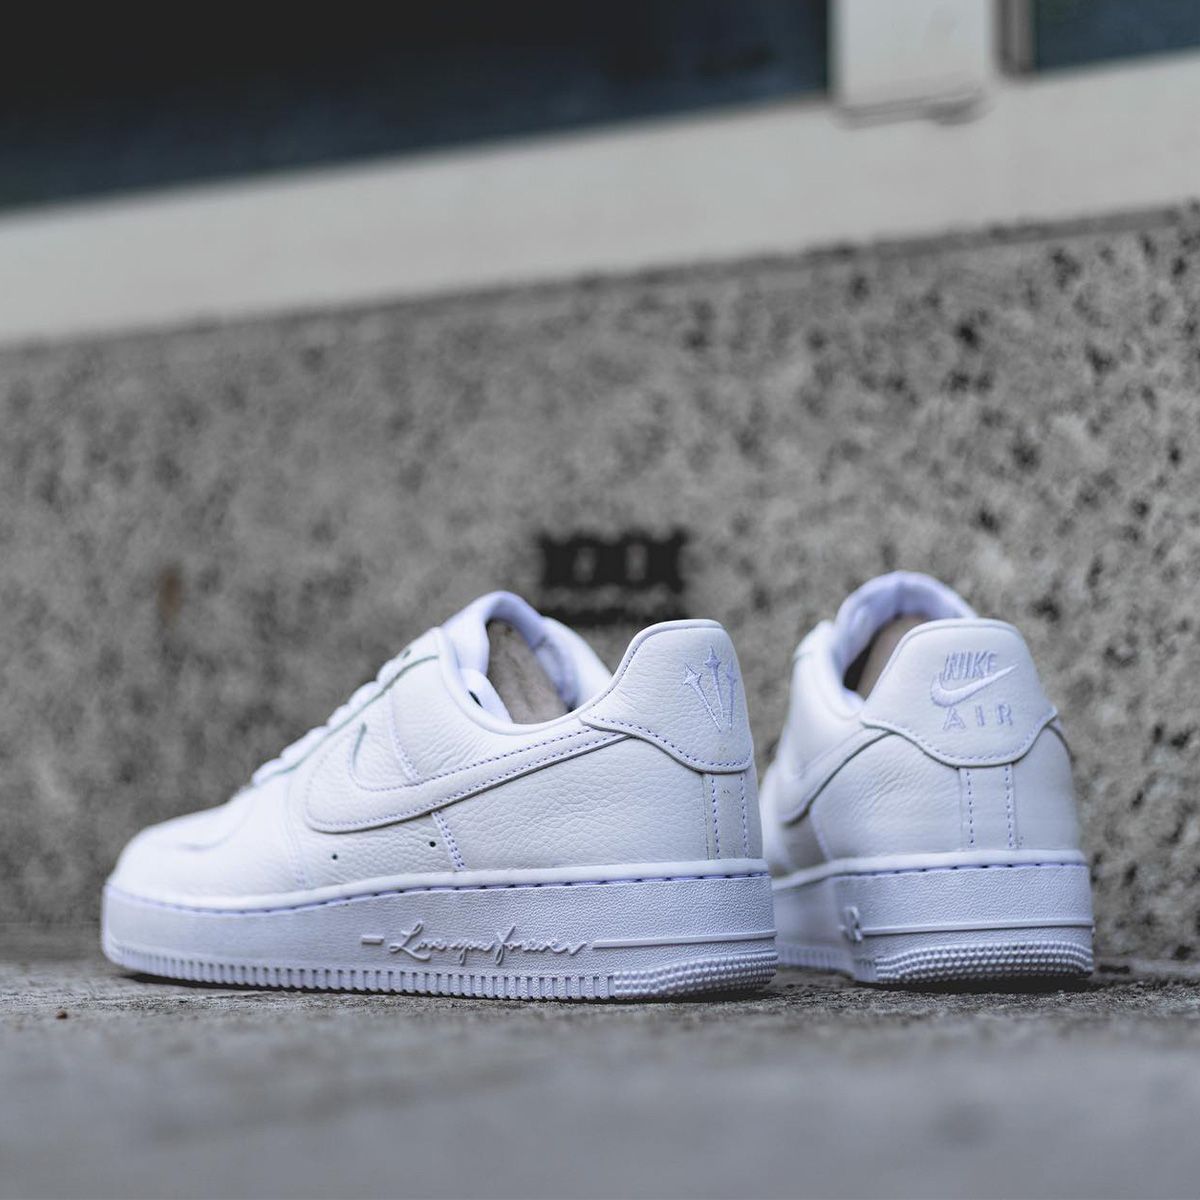 Drake's Certified Lover Boy Air Force 1 Low to Release for Kids in 2023